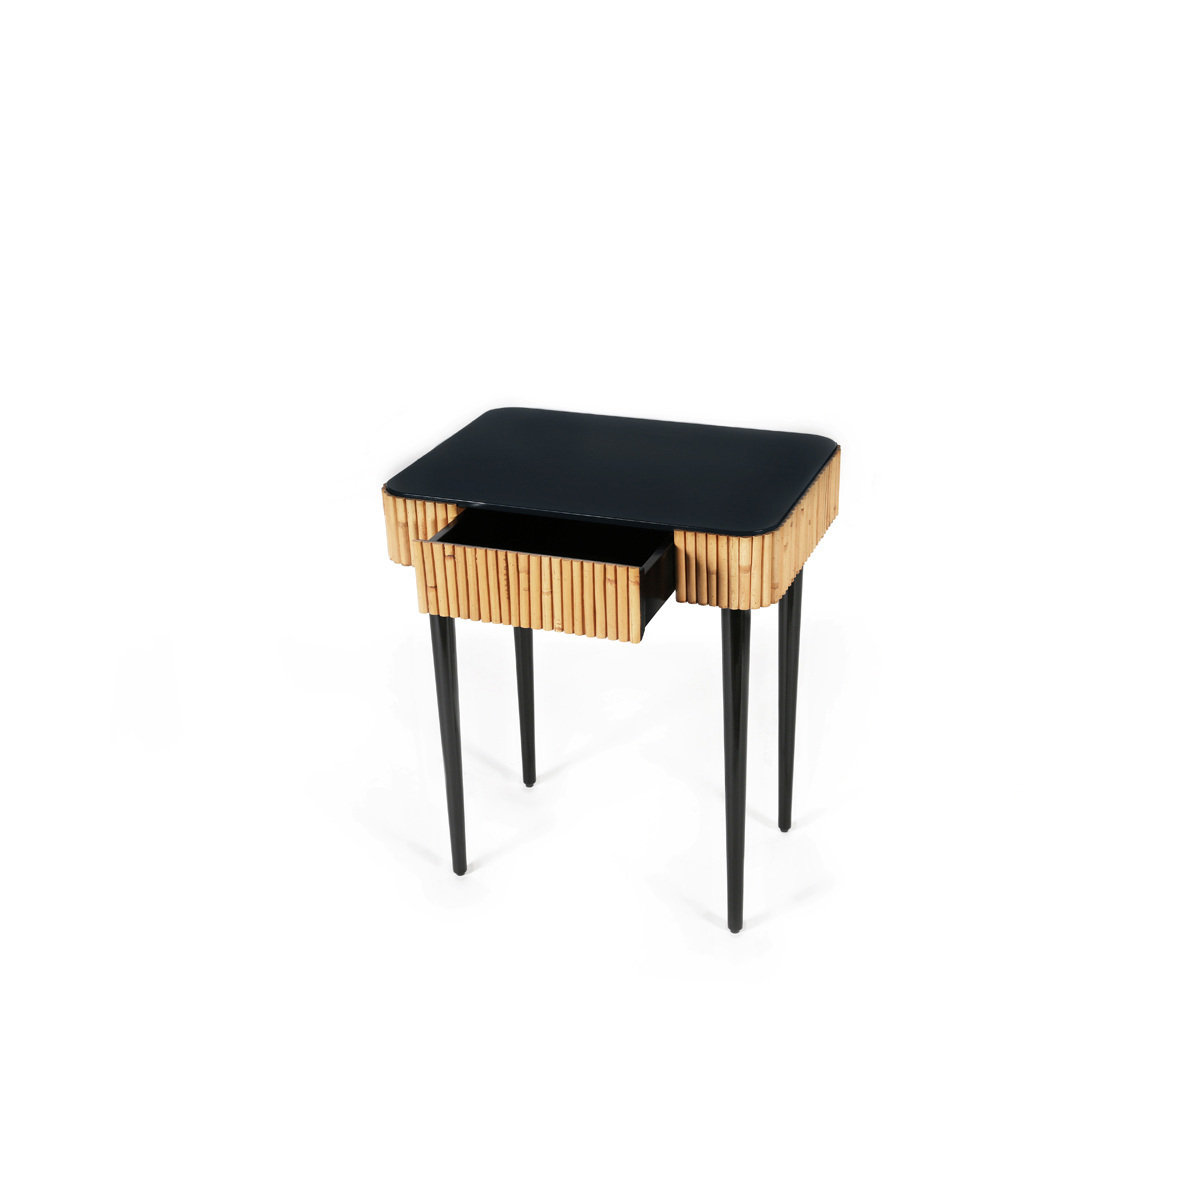 Bedside Table Riviera, Black Radish - H65 cm - Wicker / Lacquered wood - image 2